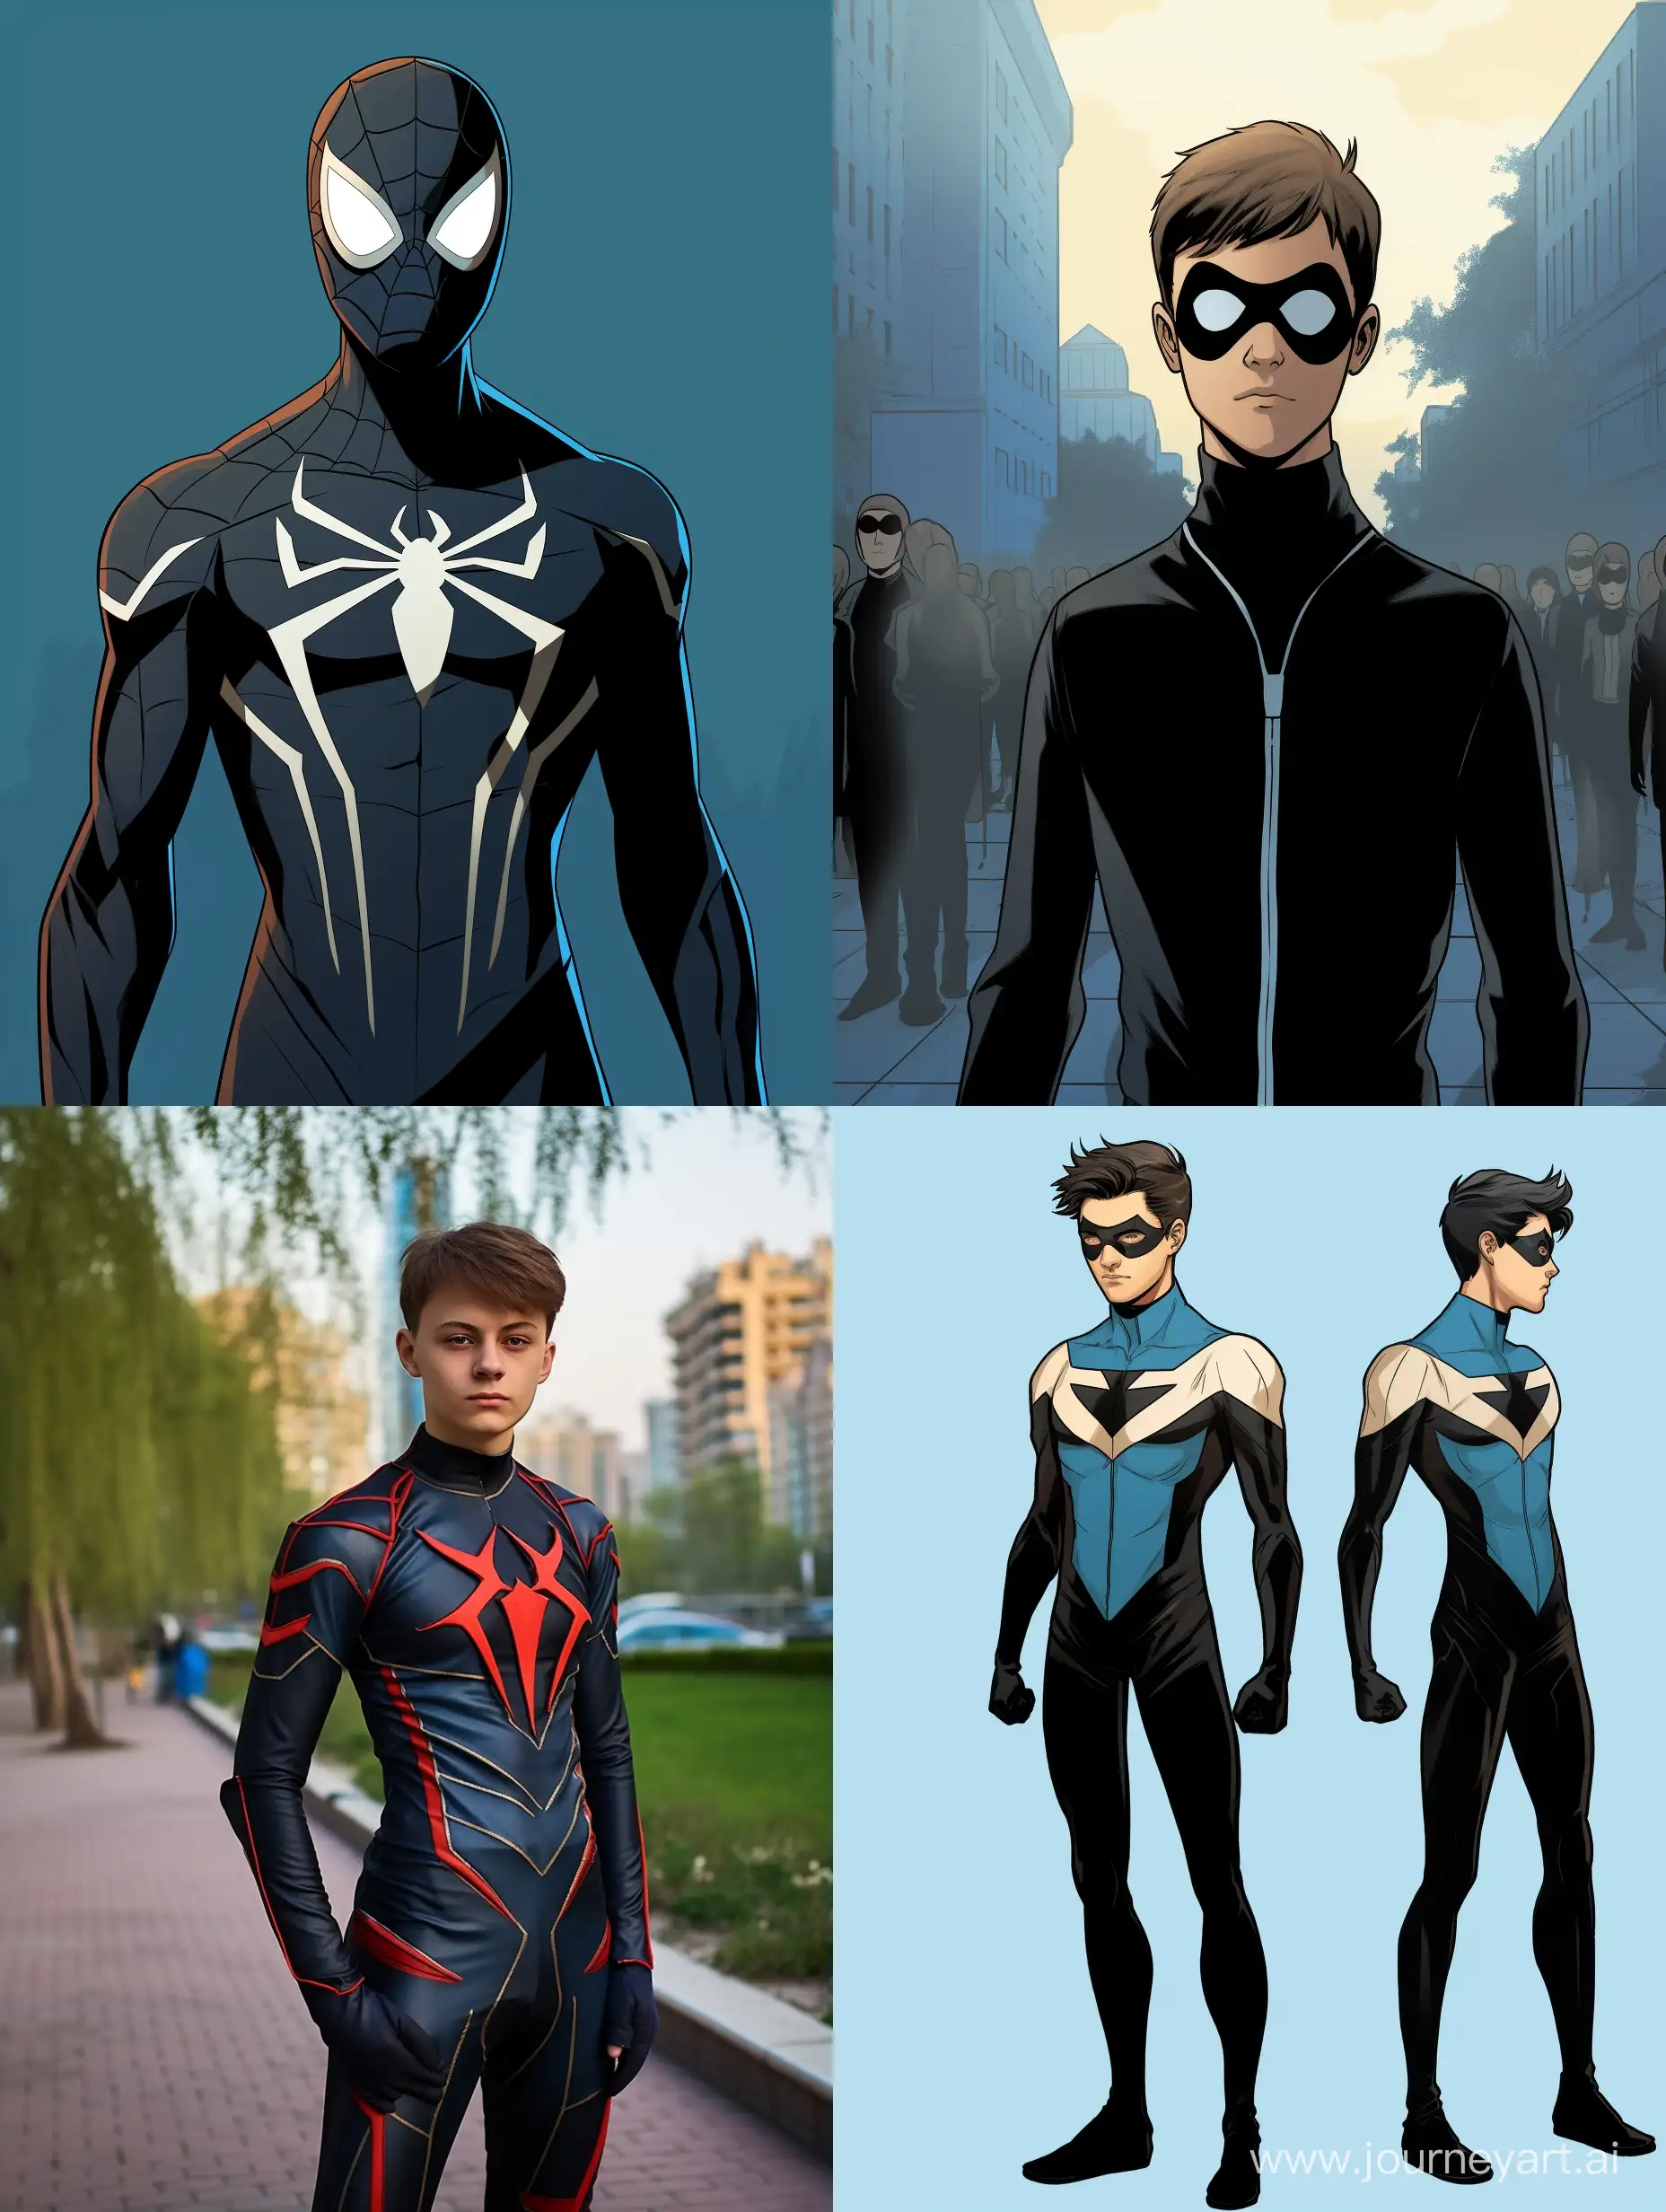 In comics style, full length, he is superhero, he is teenager, his homemade costume has blue and white colours, hi wears mask with lenses, he has a black bow, he's skinny, he is 180 centimetres tall, he hasn’t logo on his costume, his costume vaguely resembles that of Spider-Man, he has no thorns and huge pockets, he doesn't wear a hood, his homemade costume is not overflowing  with details, he doesn't wear a raincoat